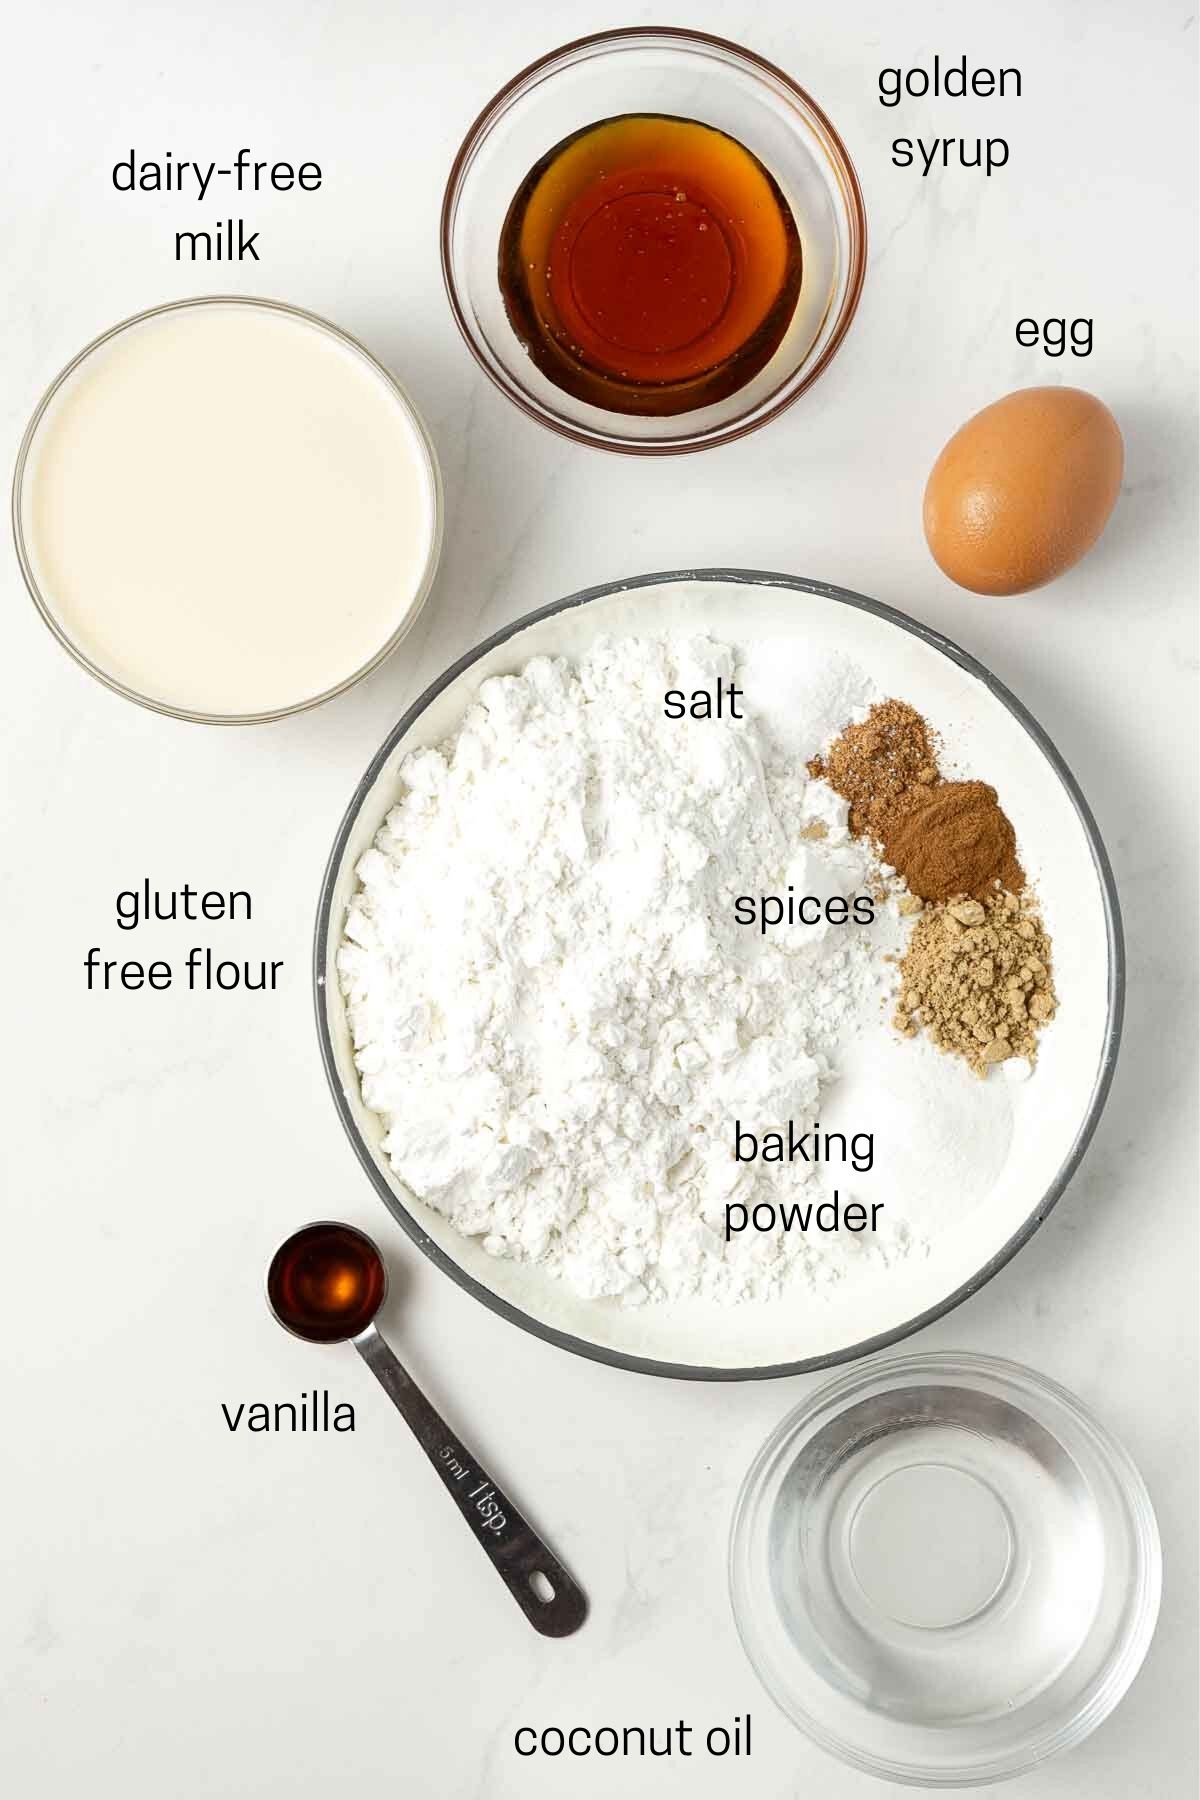 Ingredients laid out for gingerbread pancakes